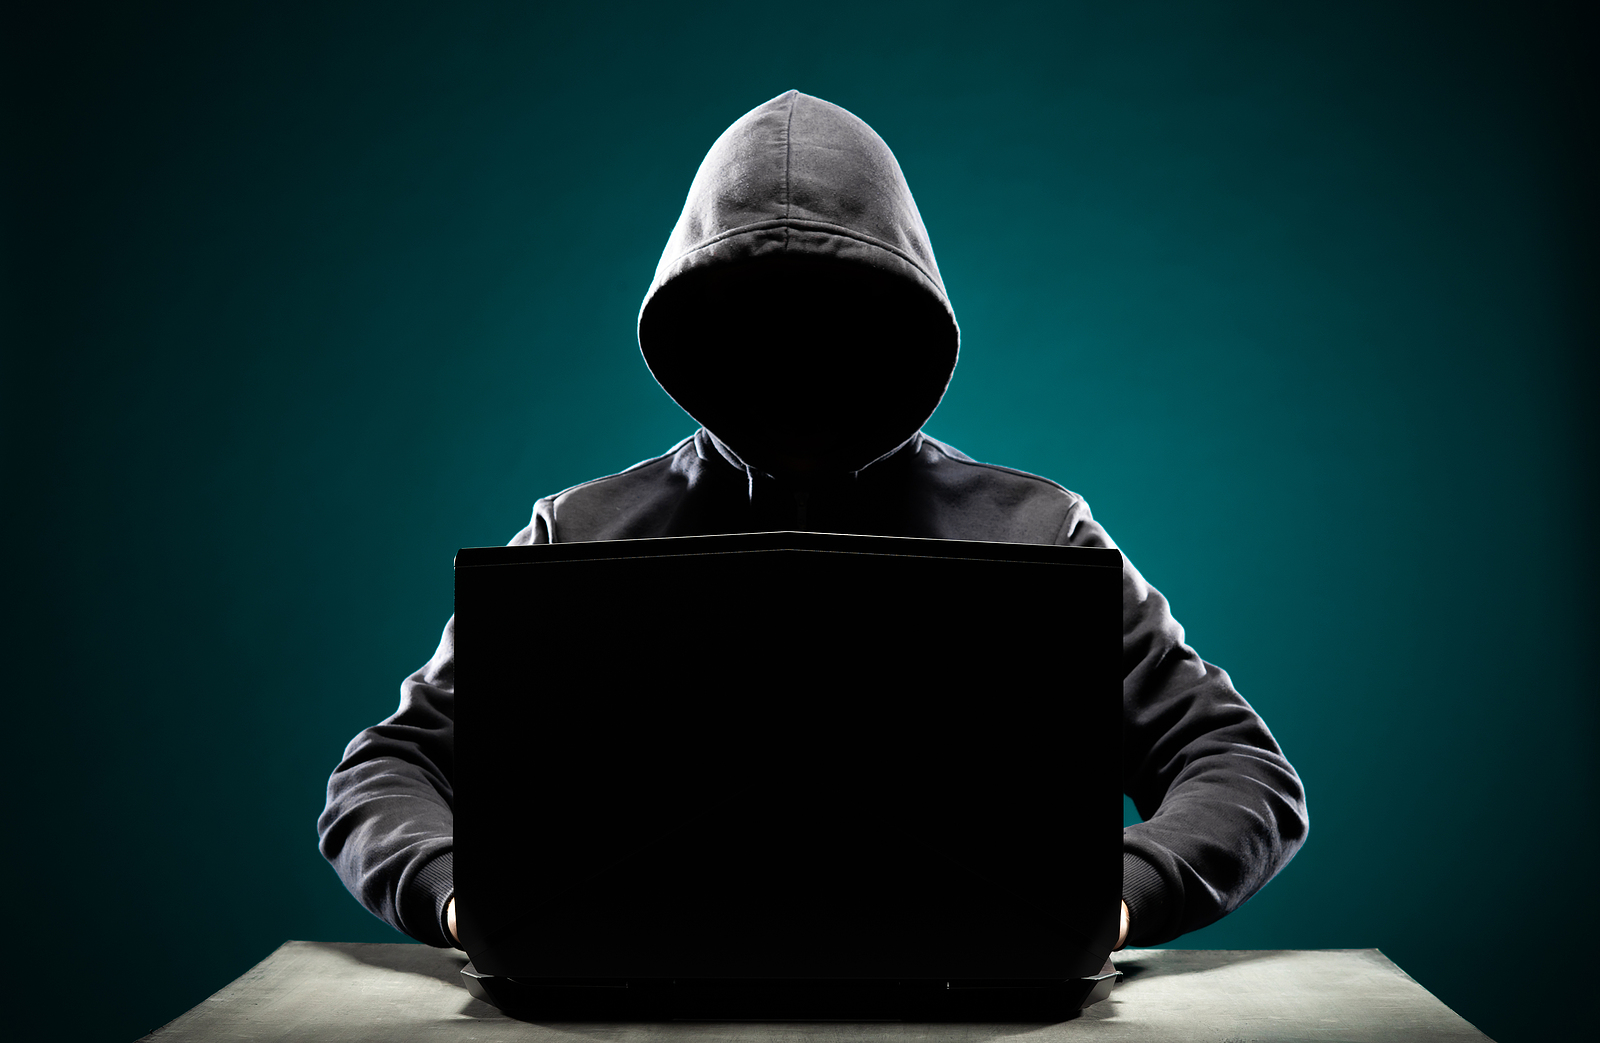 Computer-Hacker-In-Hoodie-Sweater-with-Obscured-Face-Using-Laptop